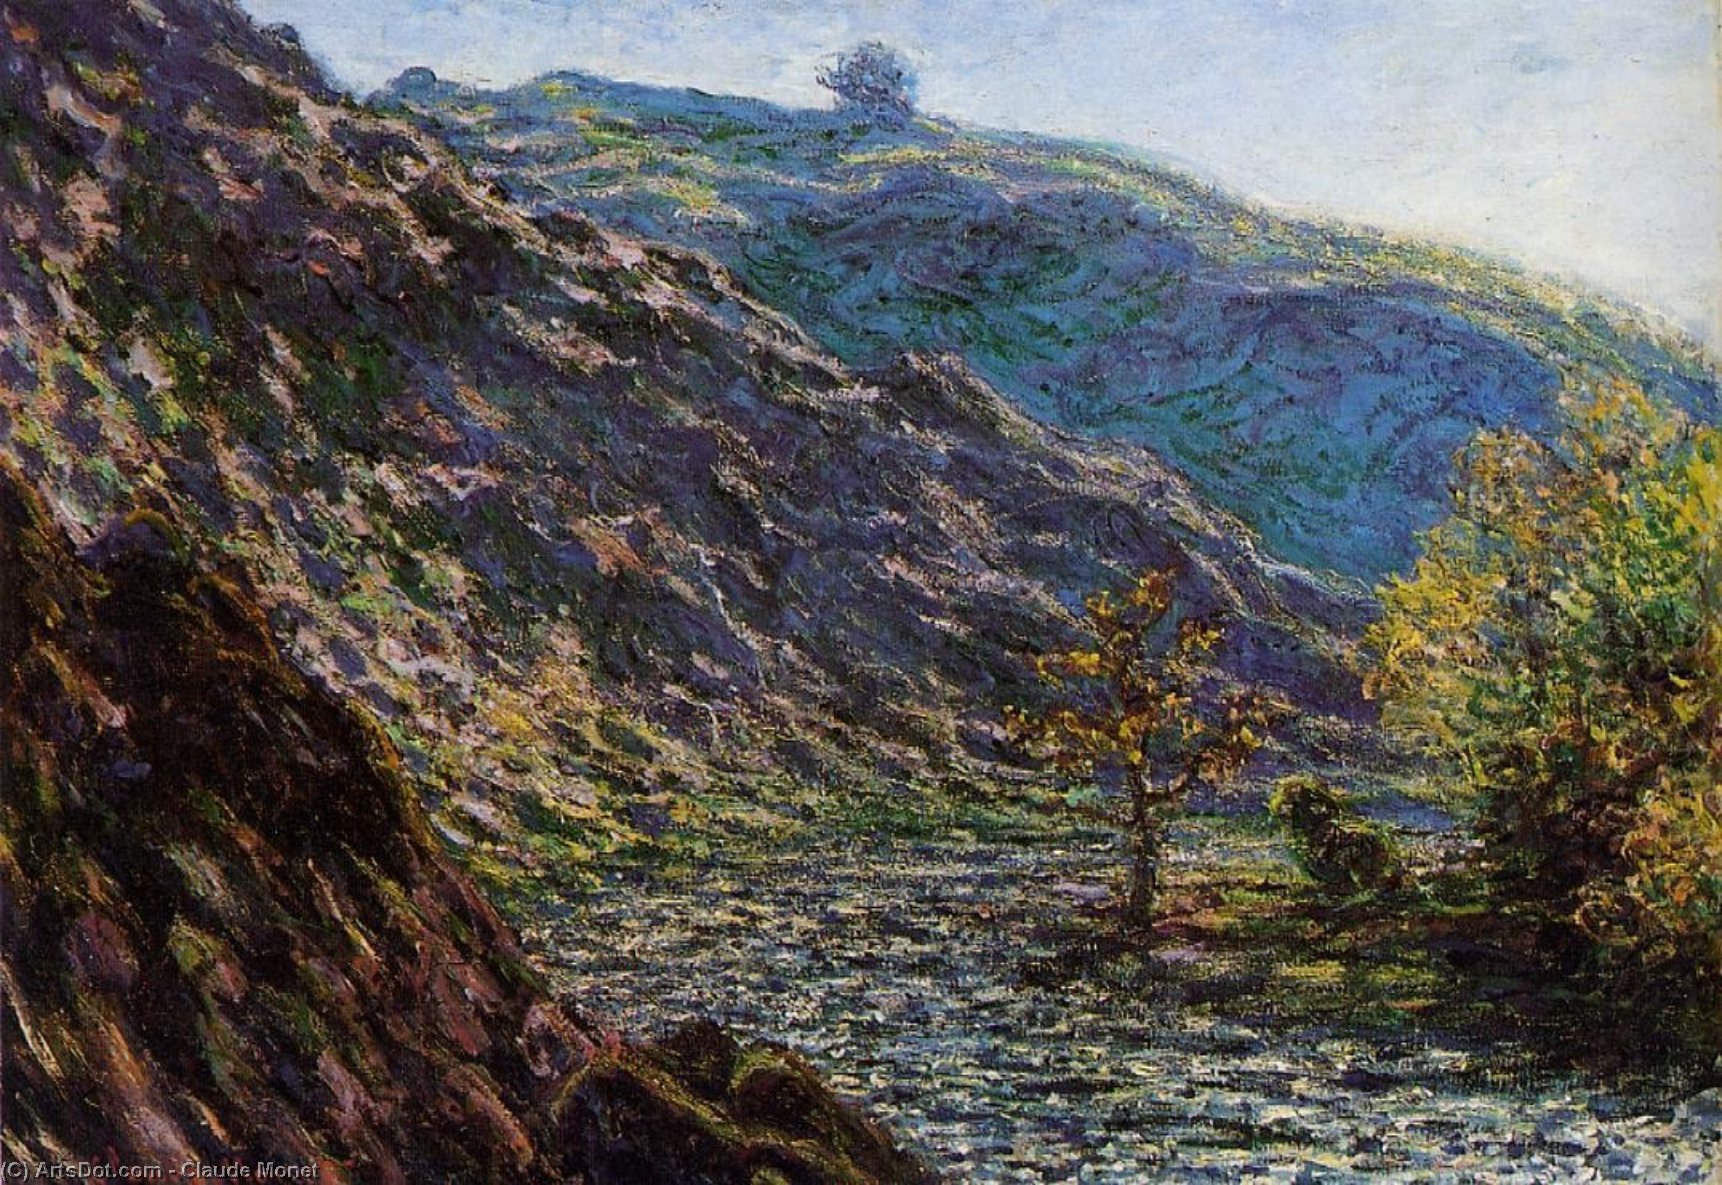 WikiOO.org - 백과 사전 - 회화, 삽화 Claude Monet - The Old Tree at the Confluence